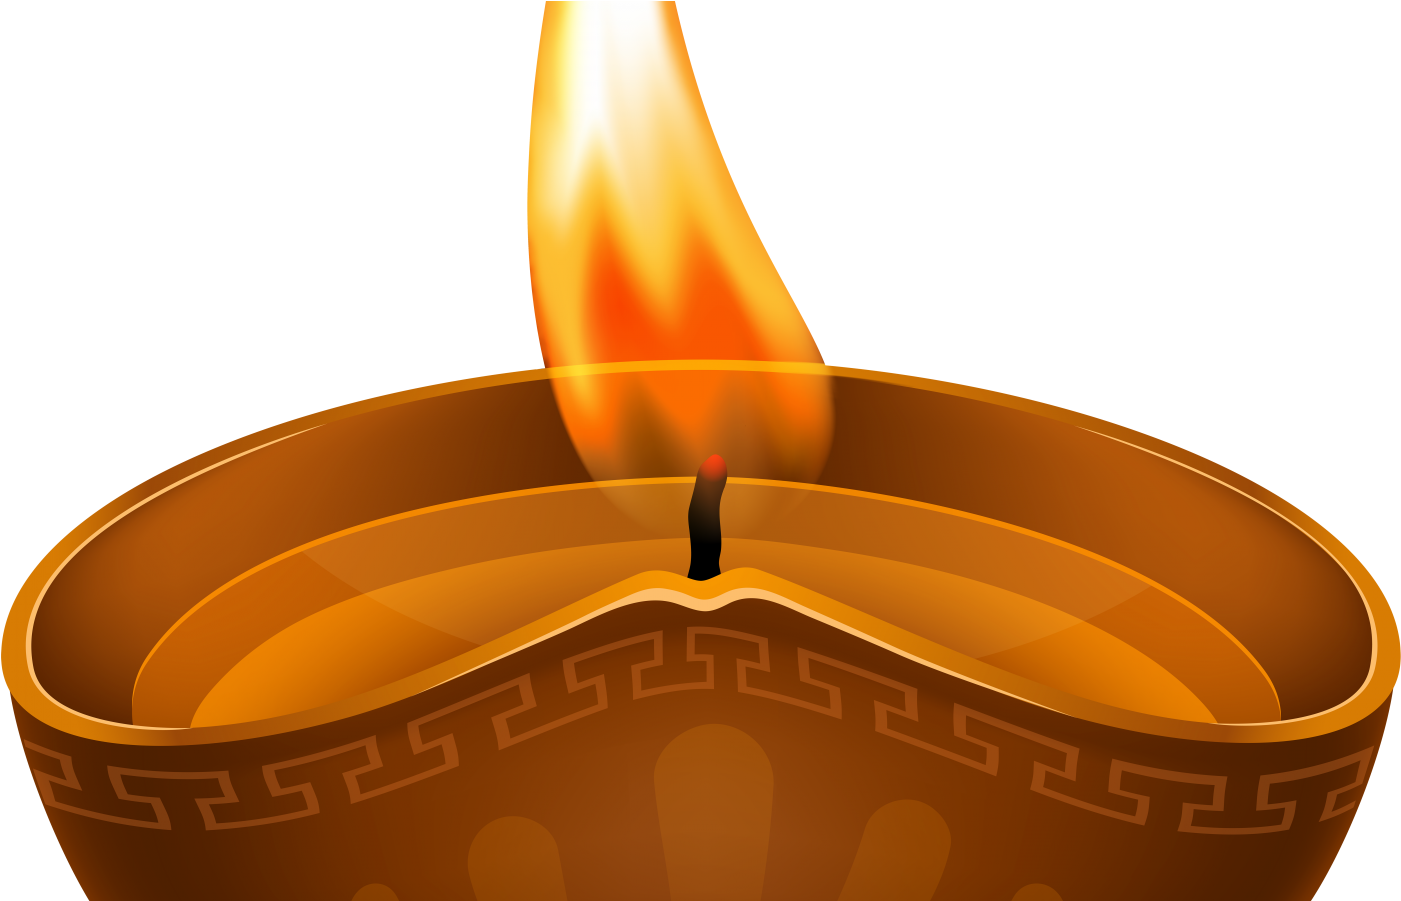 Diwali Candle Clipart - Png Download (1440x900), Png Download